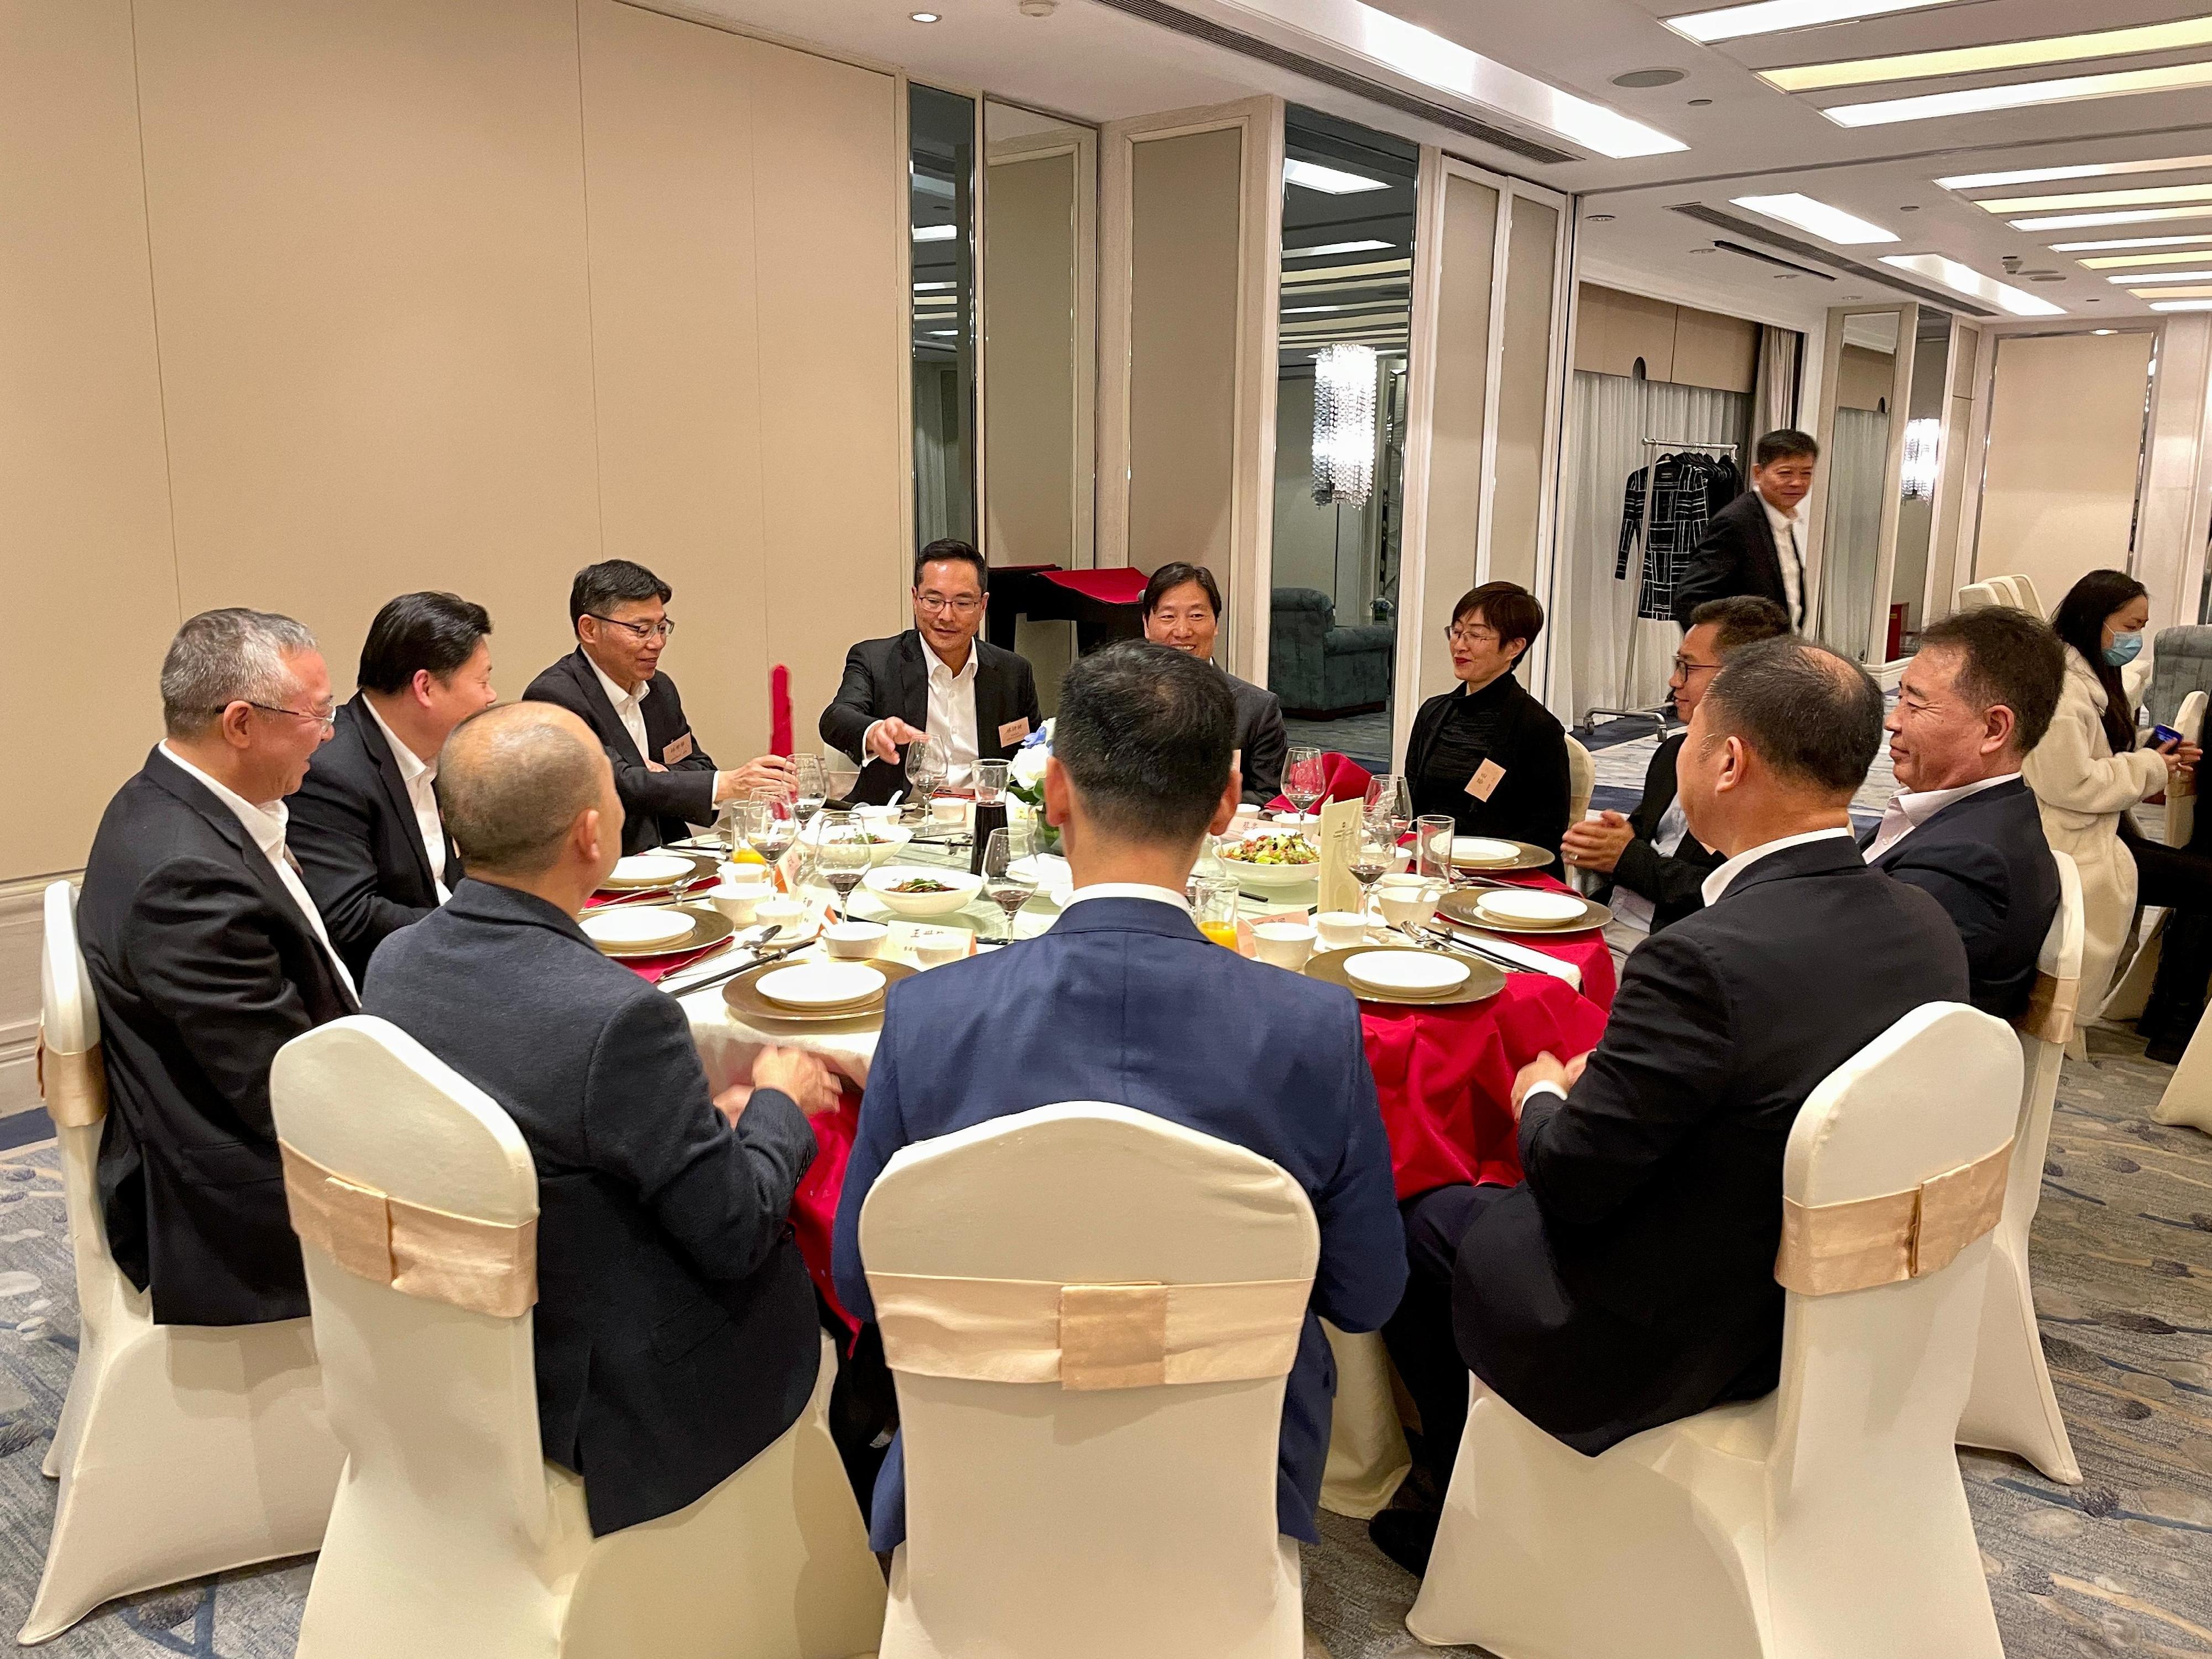 The Chairman of the Hong Kong Maritime and Port Board and the Secretary for Transport and Logistics, Mr Lam Sai-hung (third left), and the delegation had a dinner in Shanghai with representatives of the China Shipowners' Association and financial leasing enterprises from Shanghai and Beijing, during which he introduced the advantages of Hong Kong's maritime industry in enjoying the strong support of the motherland while being closely connected to the world.